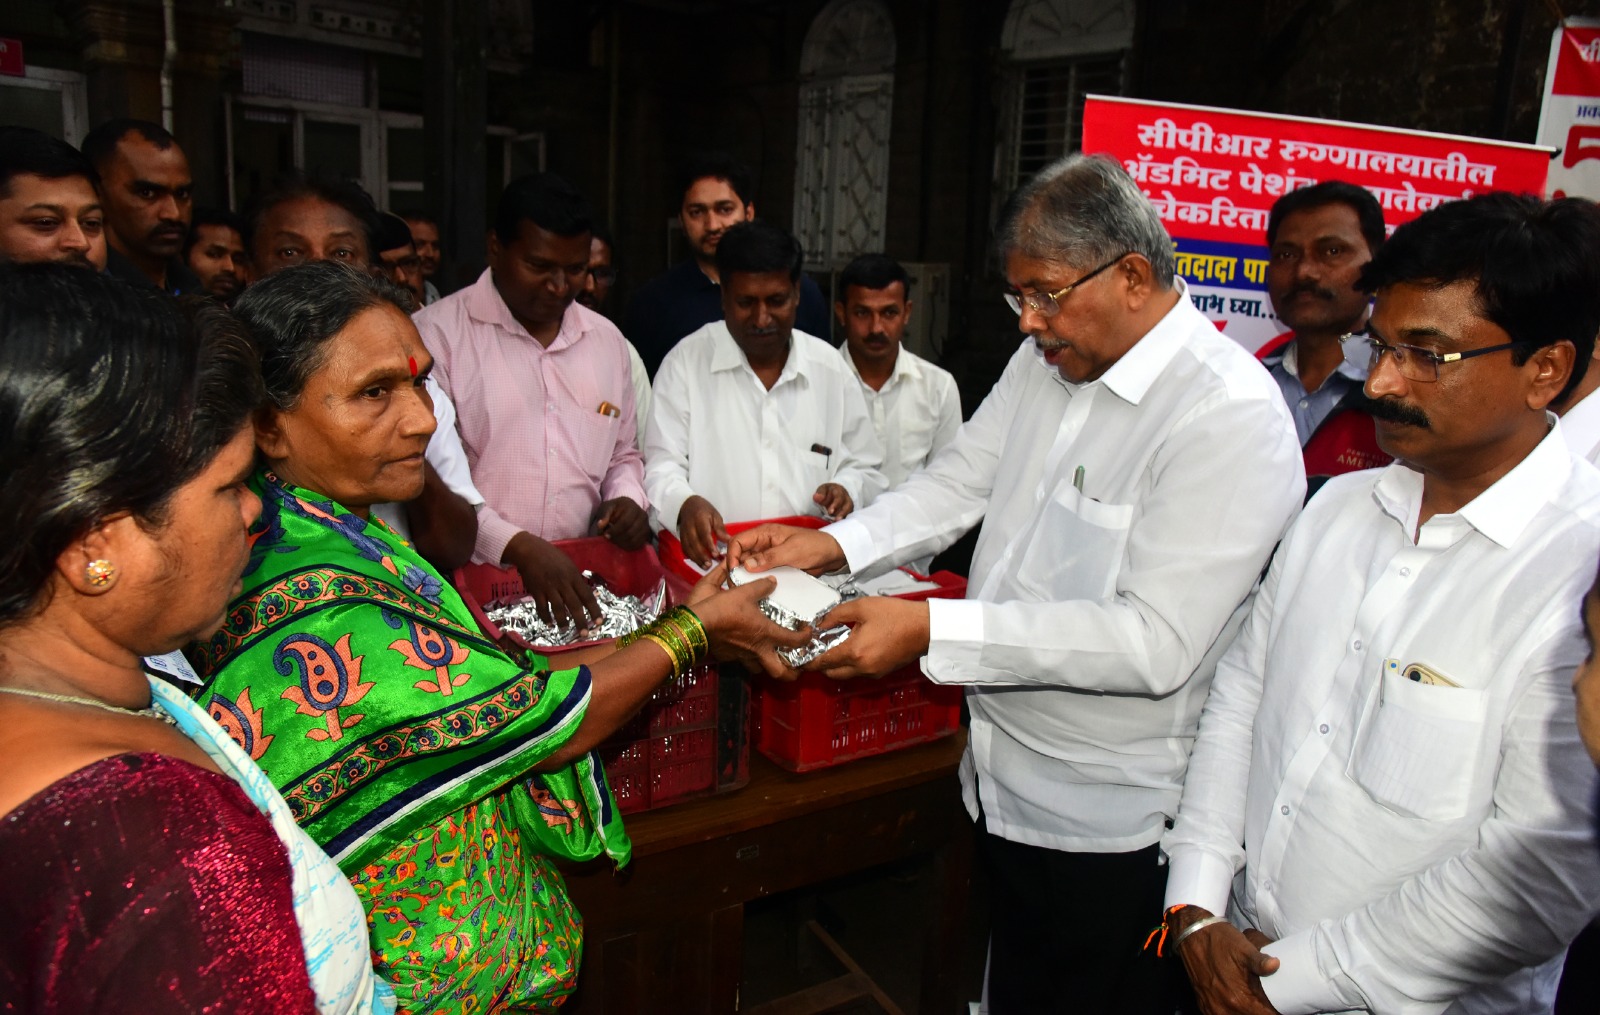 Minister Chandrakant Dada Patil visited the Goods Sale Kendra for CPR patients